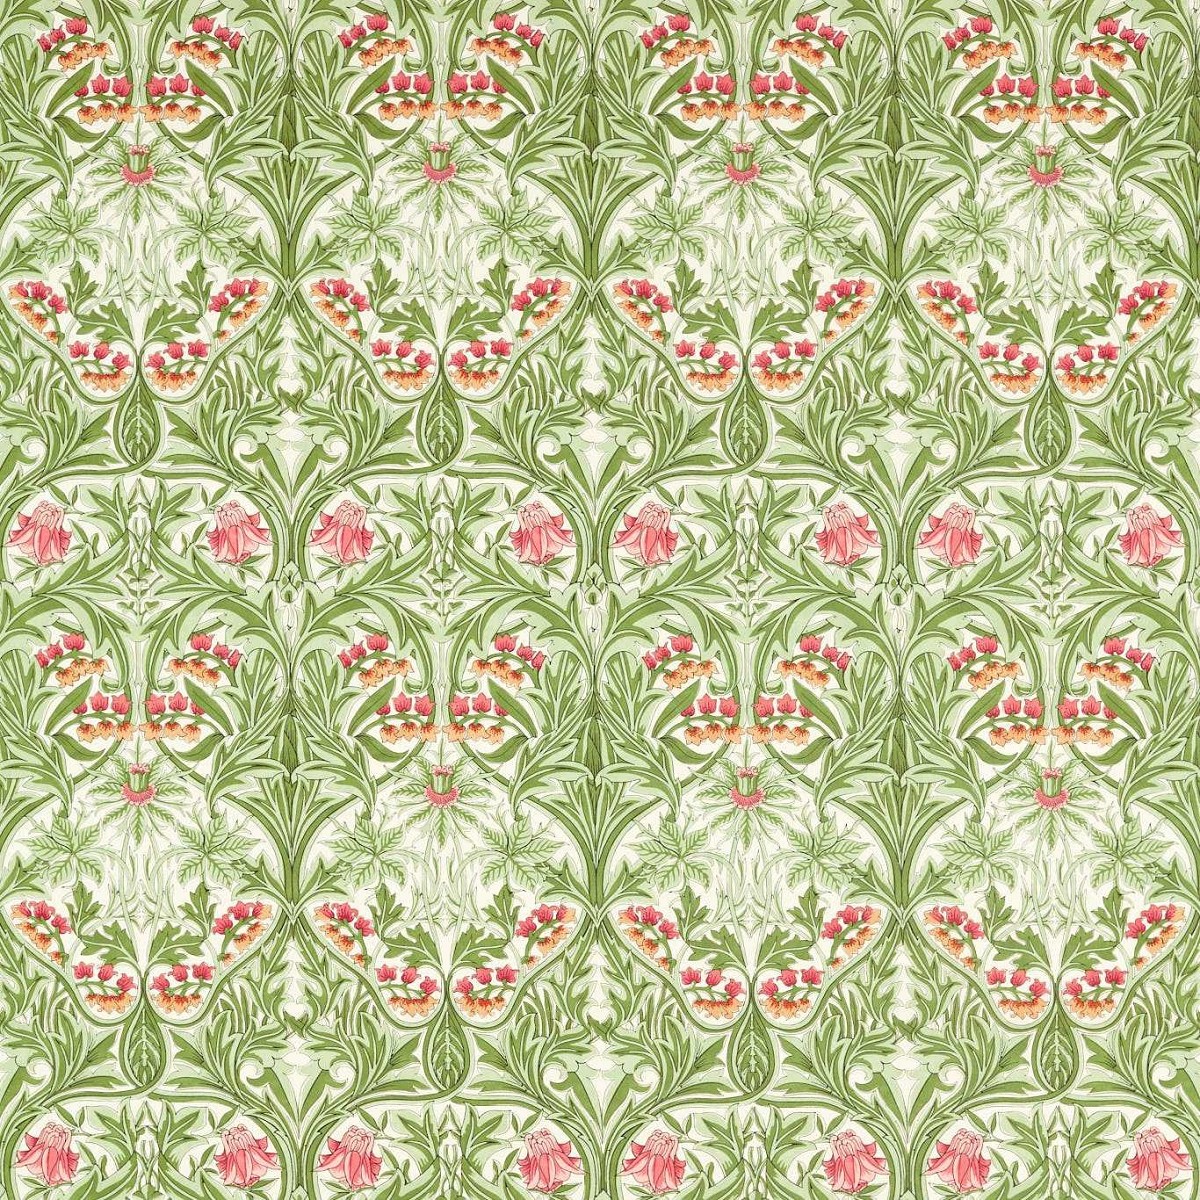 Bluebell Leaf Green/Sweet Briar Fabric by William Morris & Co.